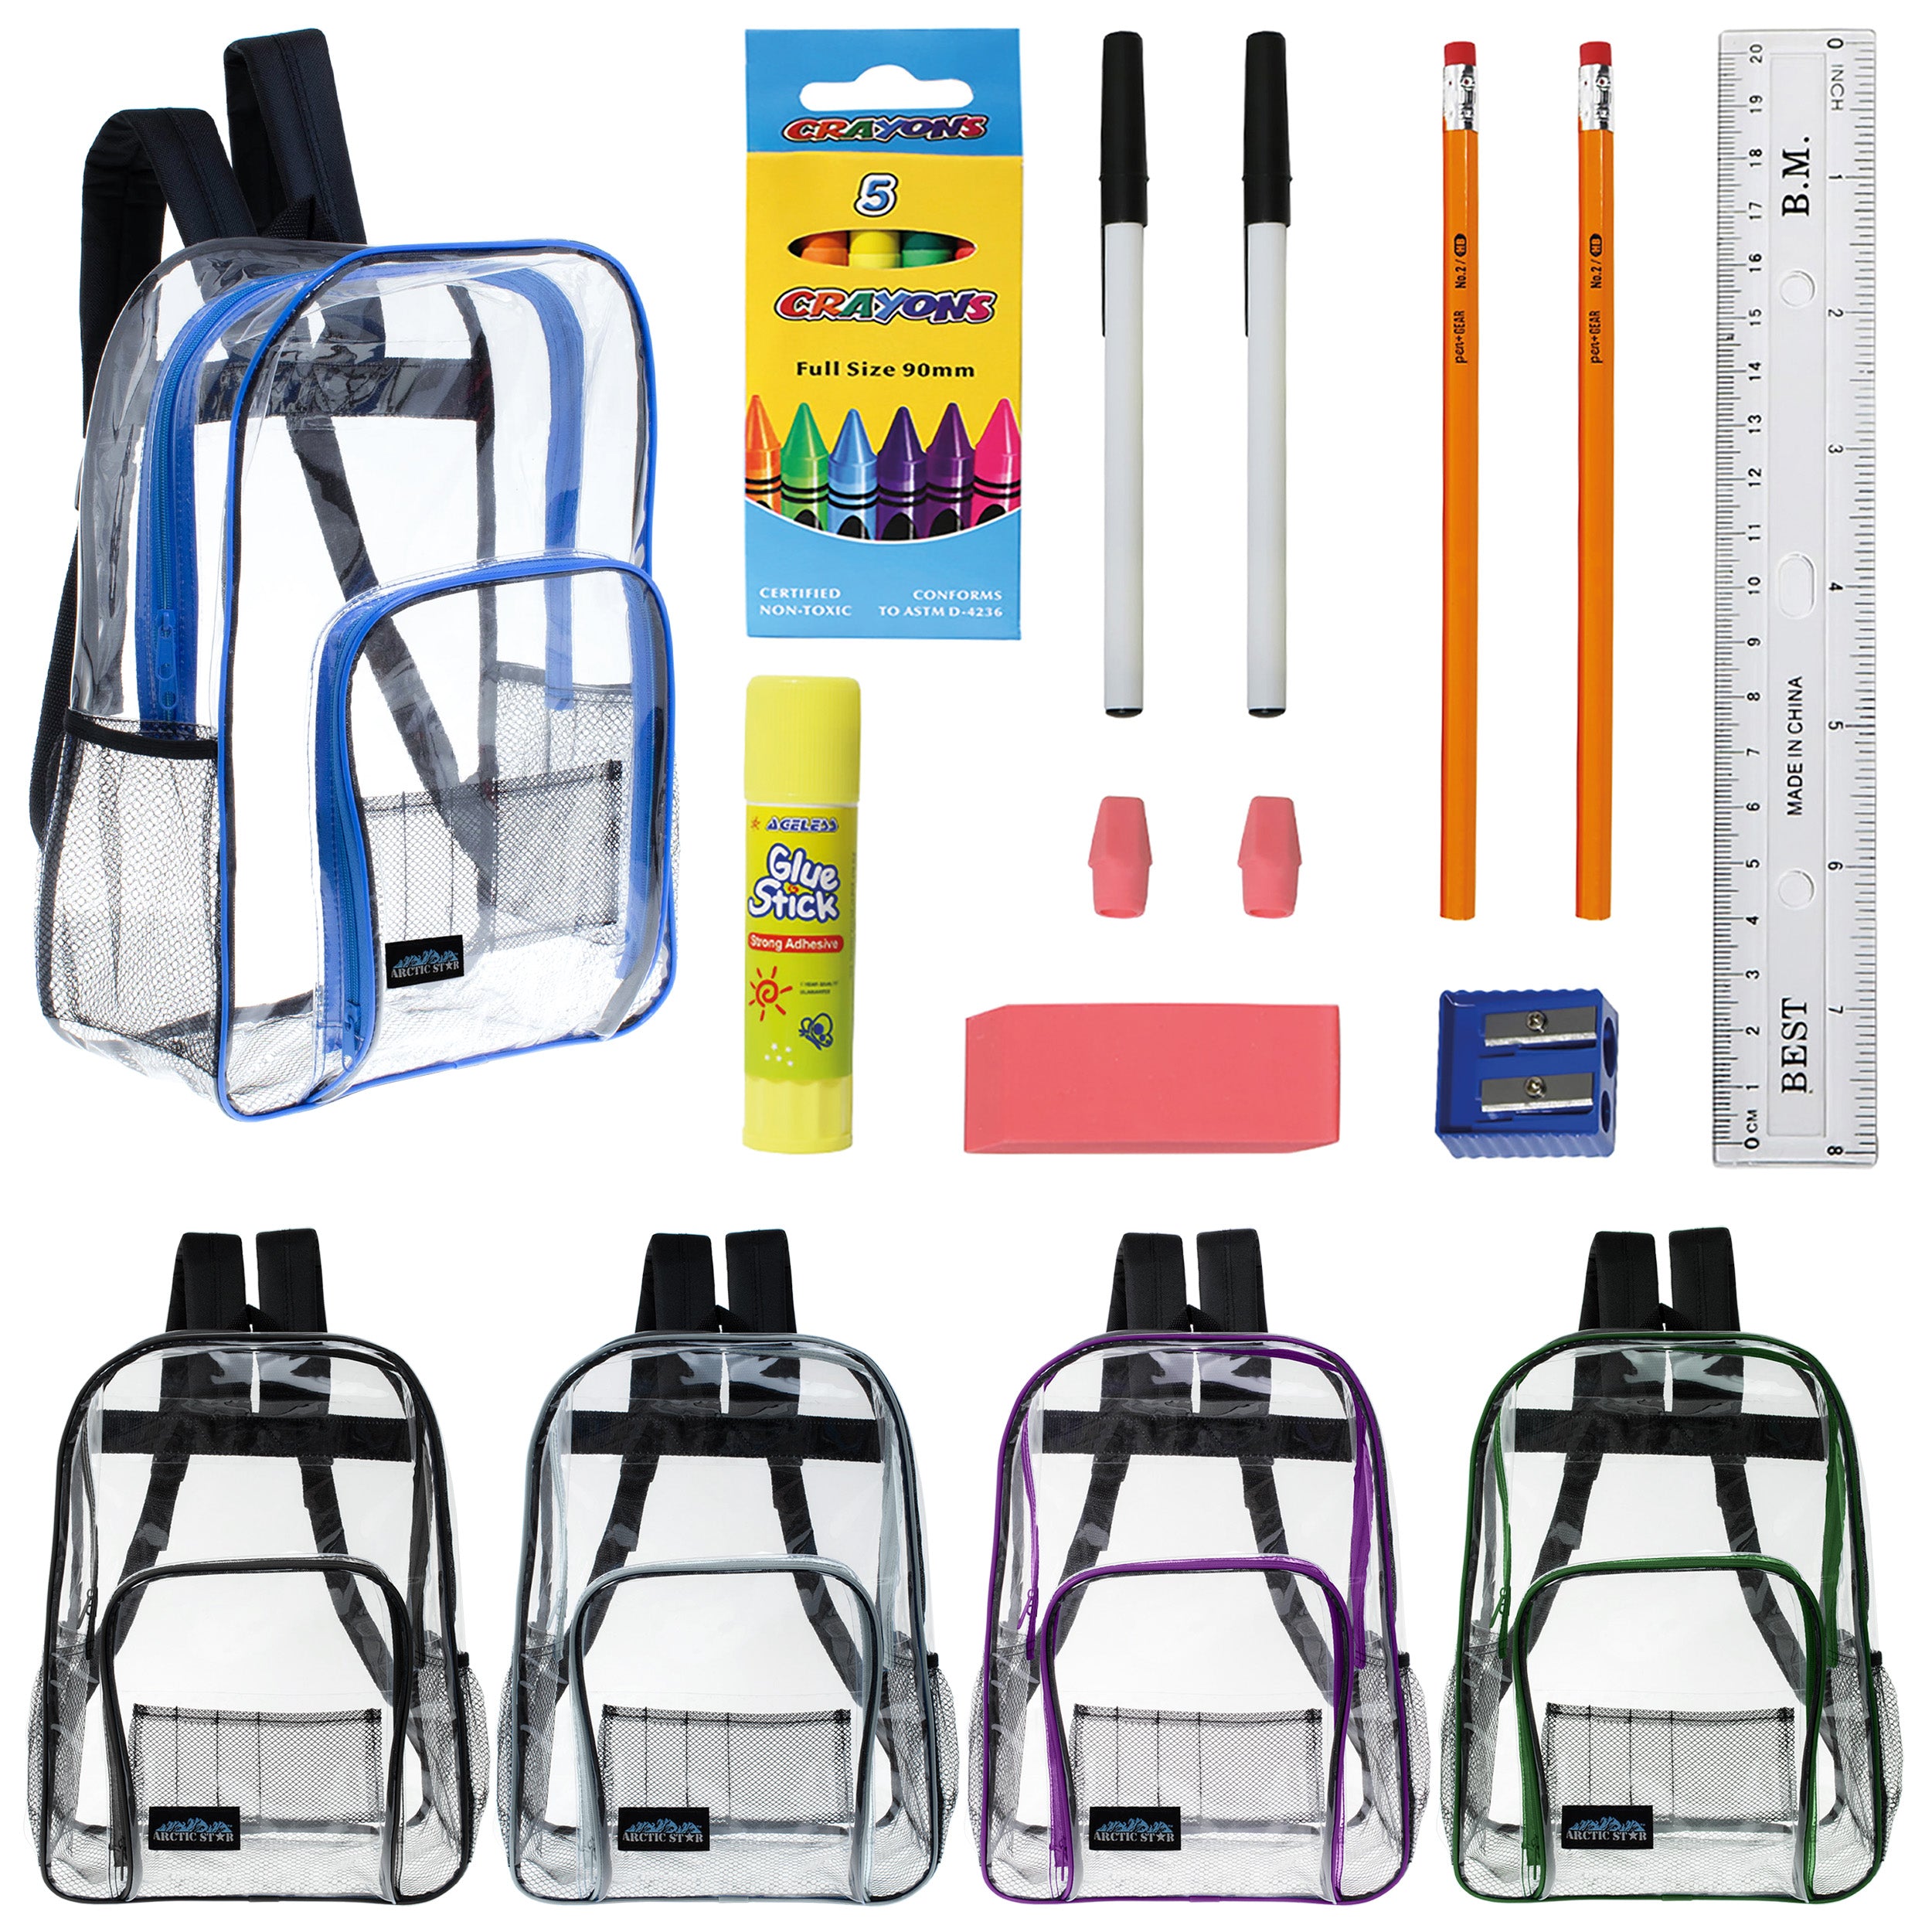 17 Inch Wholesale Backpacks in Assorted Colors with School Supply Kits Bulk - Kit of 12